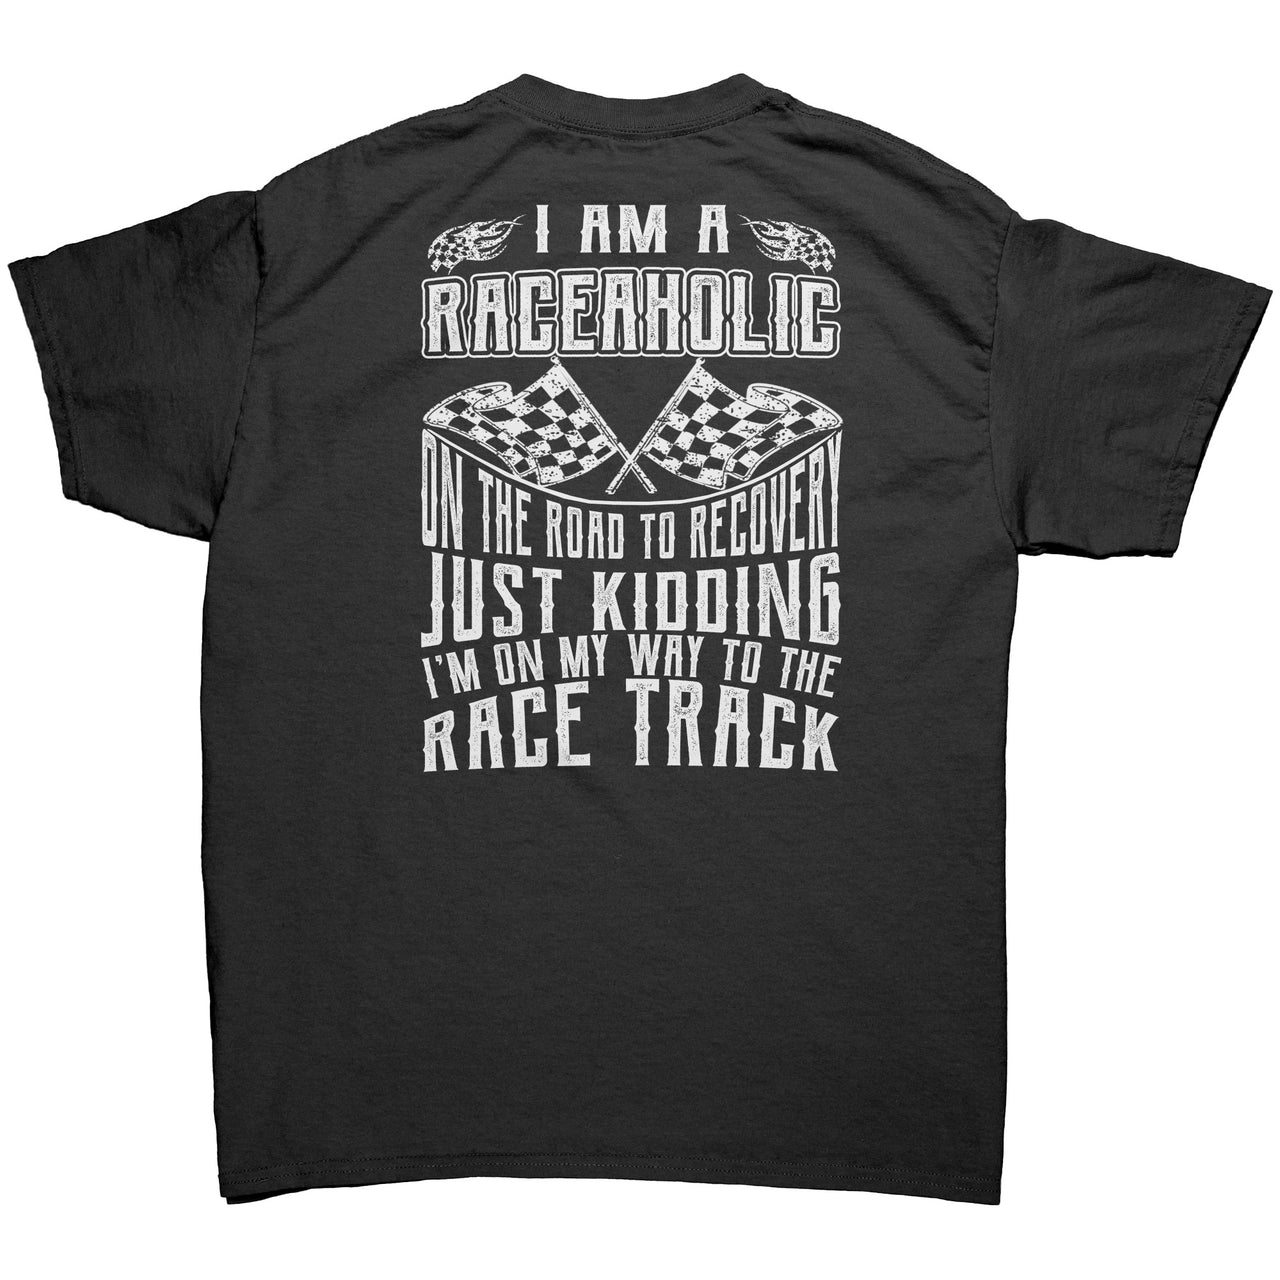 I'm A Raceaholic On The Road To Recovery Tees DoB